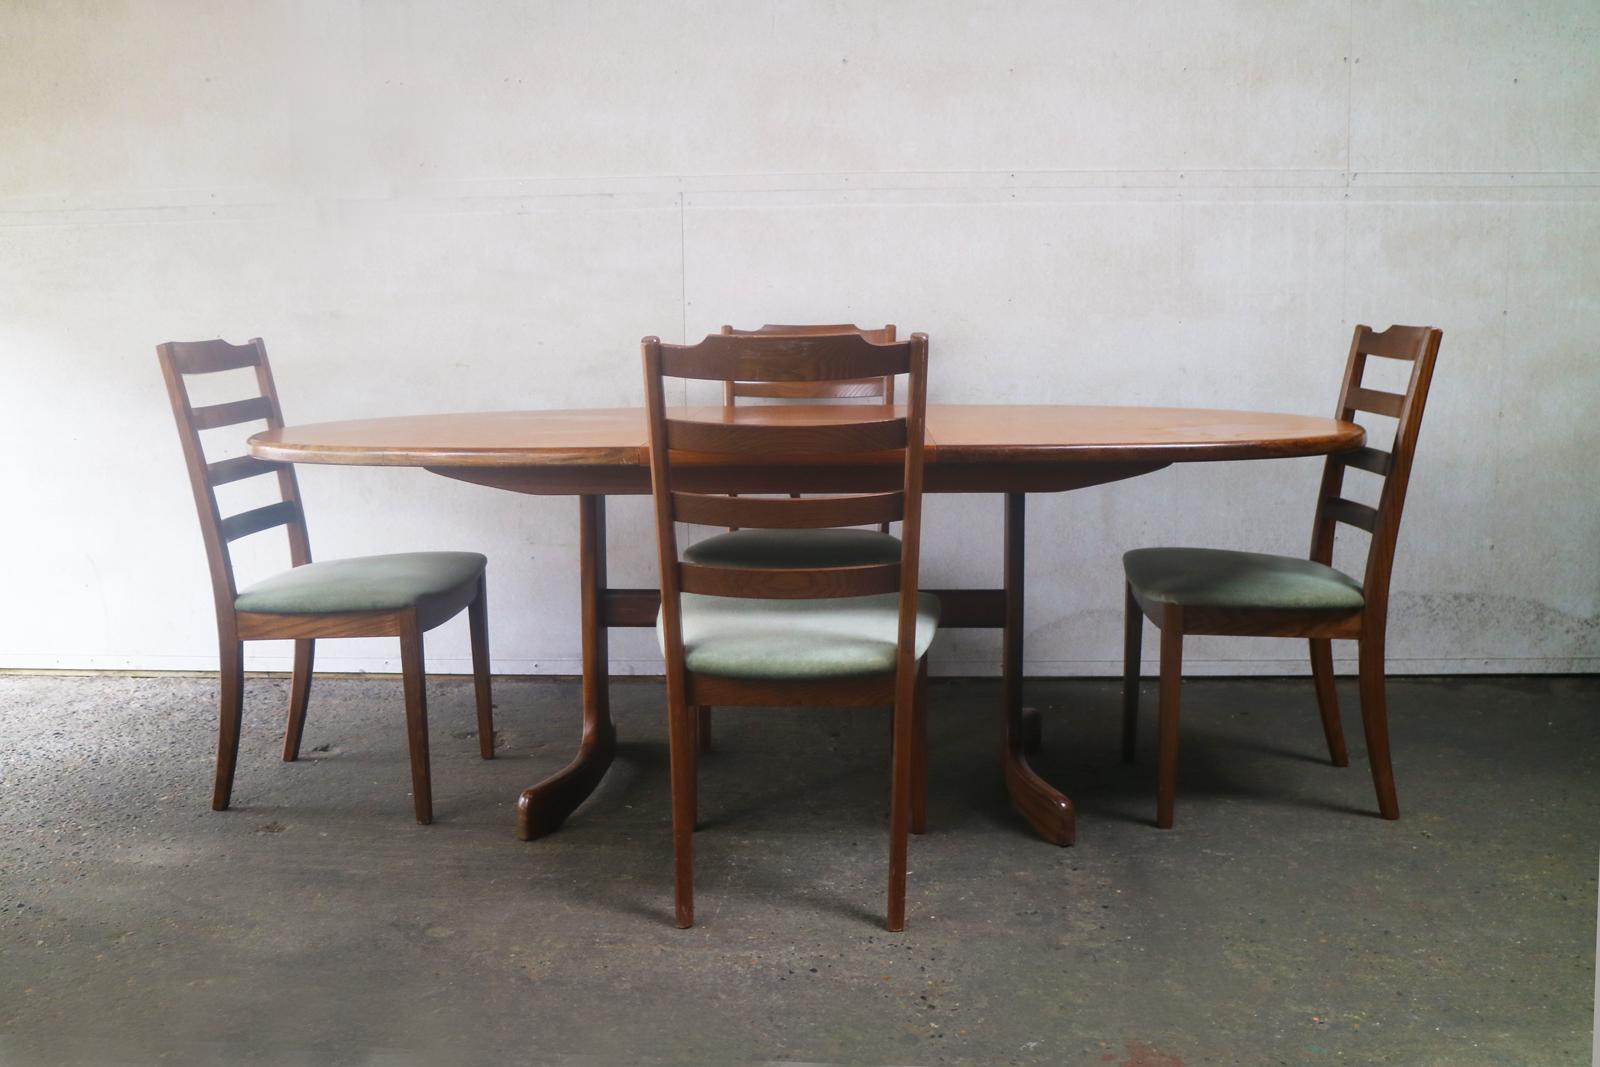 A large G plan extending ellipse shaped teak dining table with a matching, very elegant set G plan dining chairs upholstered in the original light green velour fabric. 

The dining table has a lovely smooth elliptical shape with light teak finish,